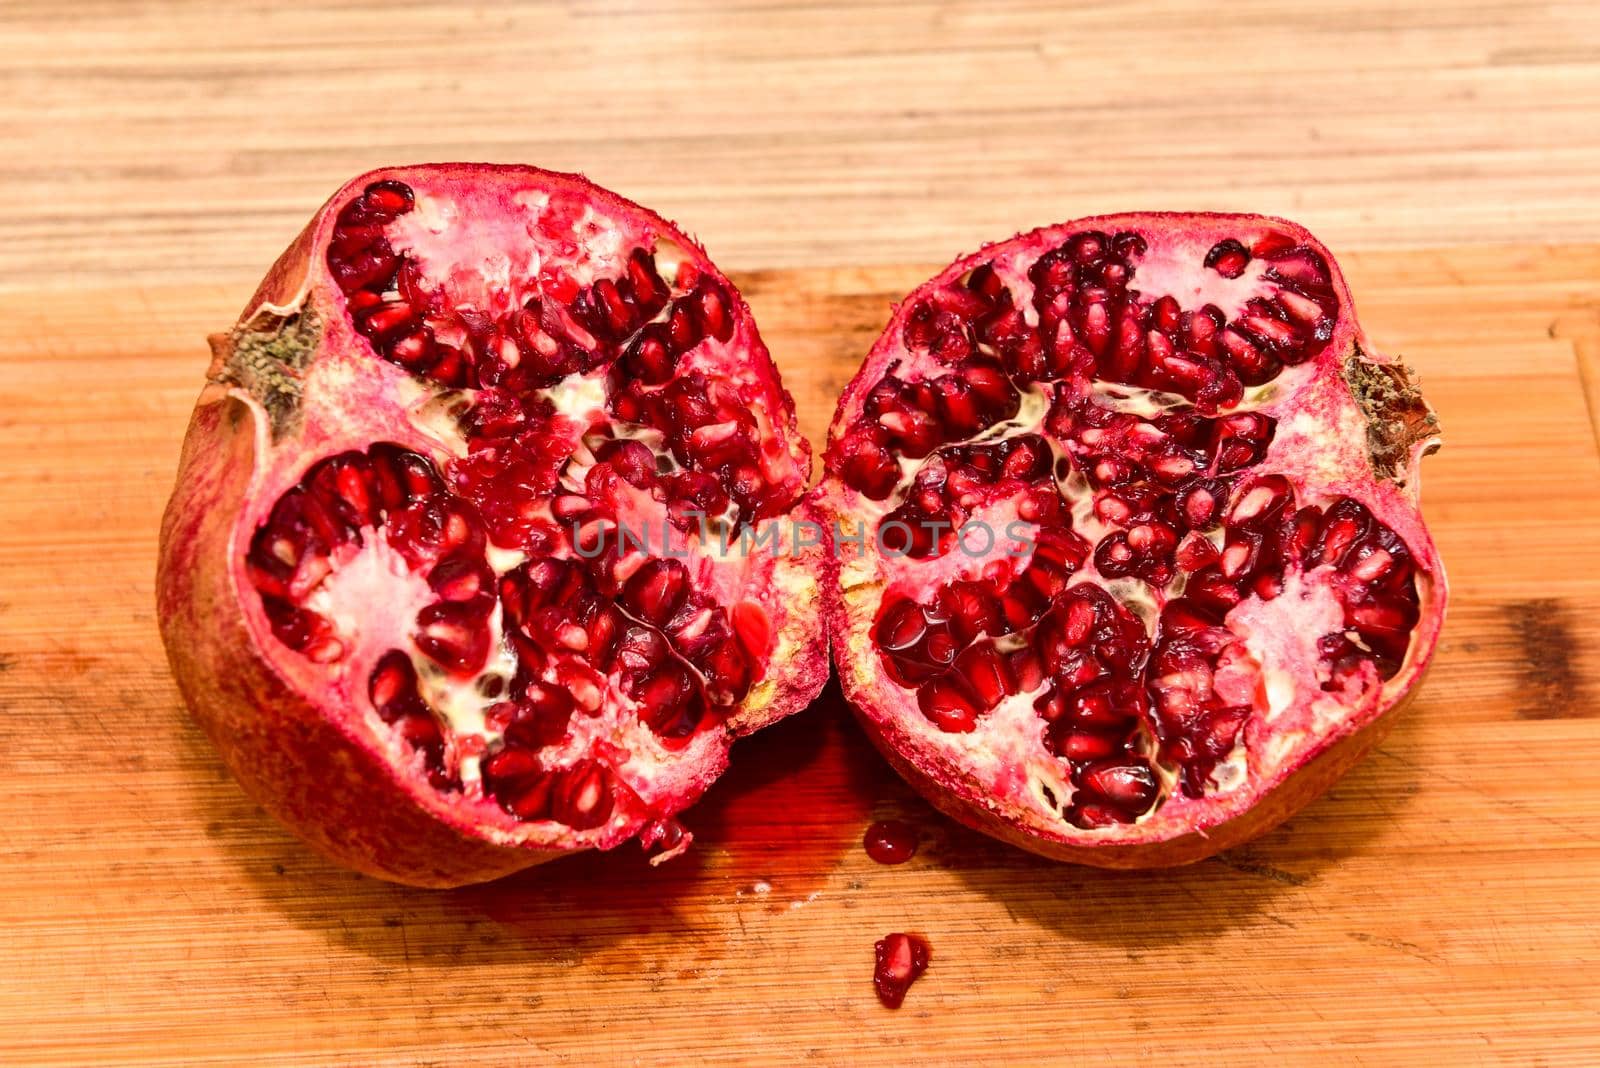 Halved red ripe pomegranate fruits on a wooden board. Natural pomegranate closeup.